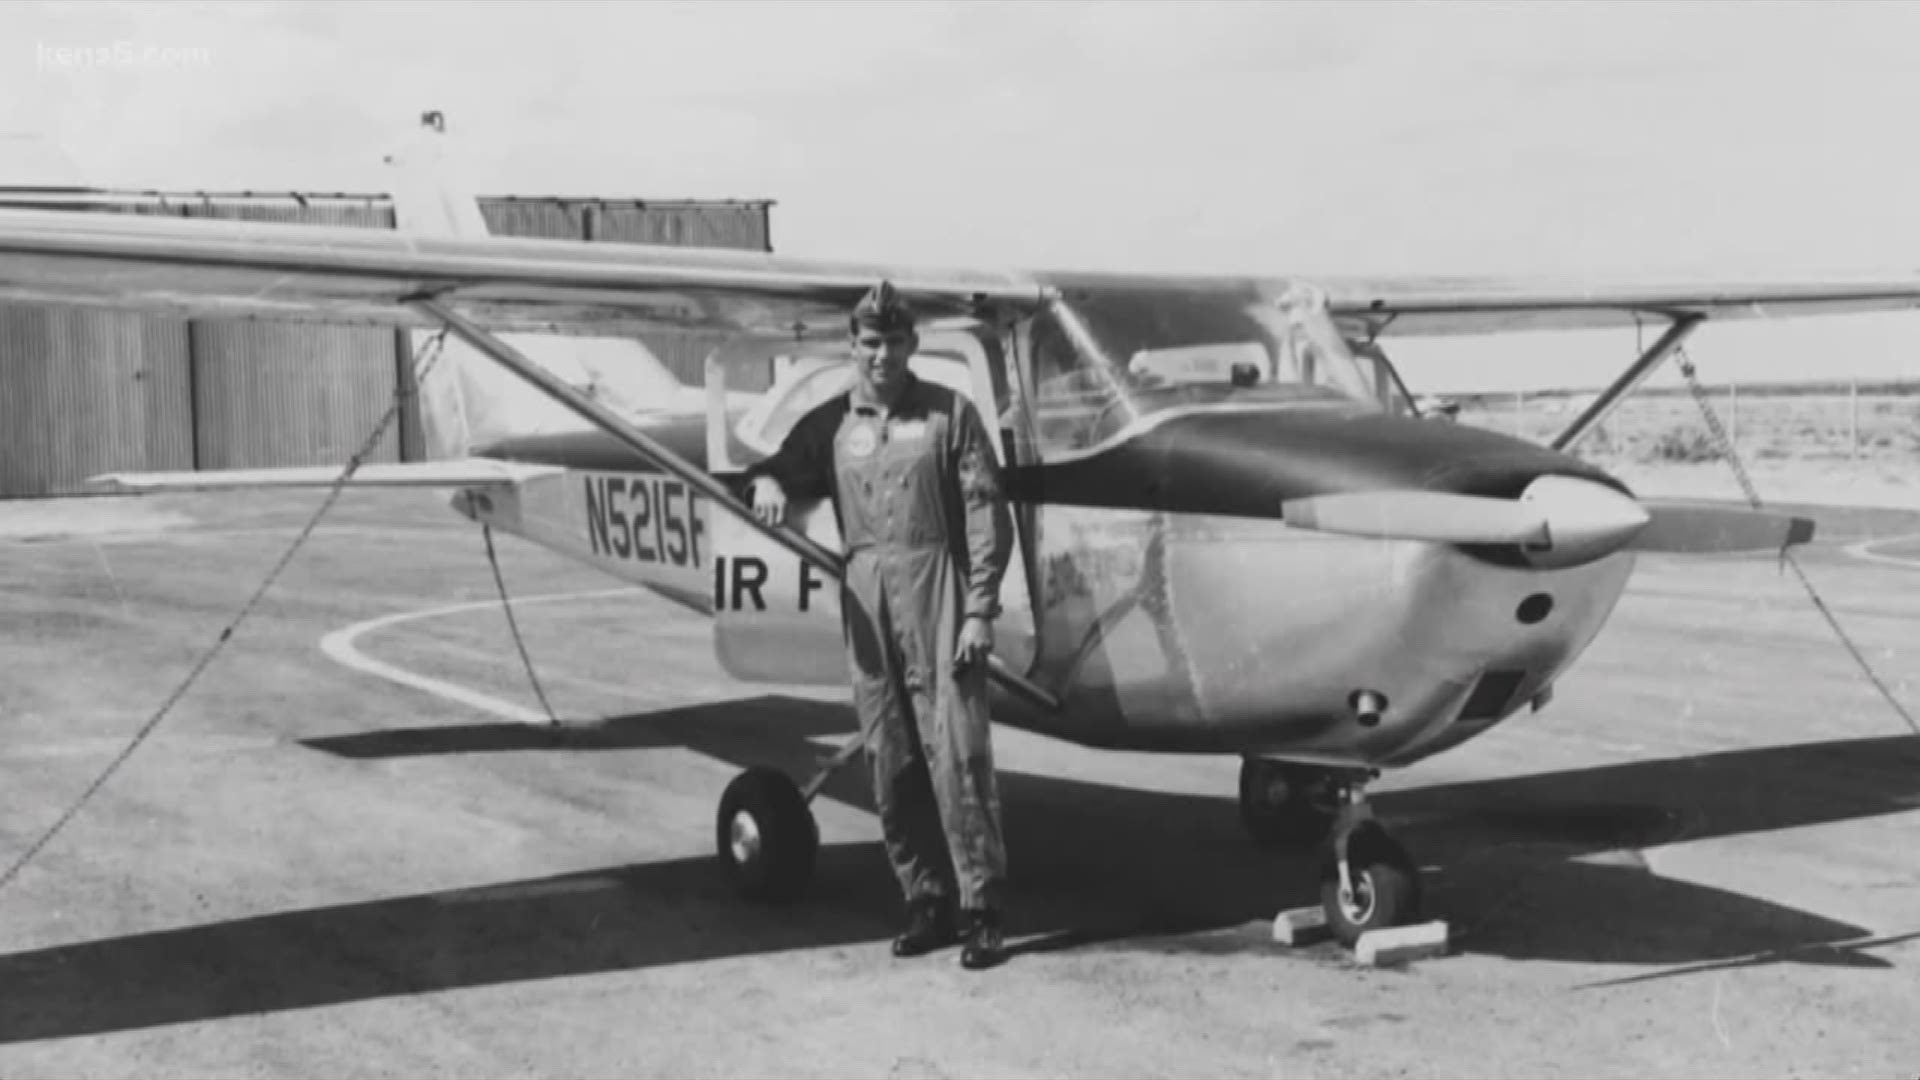 An example of true bravery and strength:  Captain Lance P. Sijan was on a mission when ejected from his aircraft over Laos in November 1967.